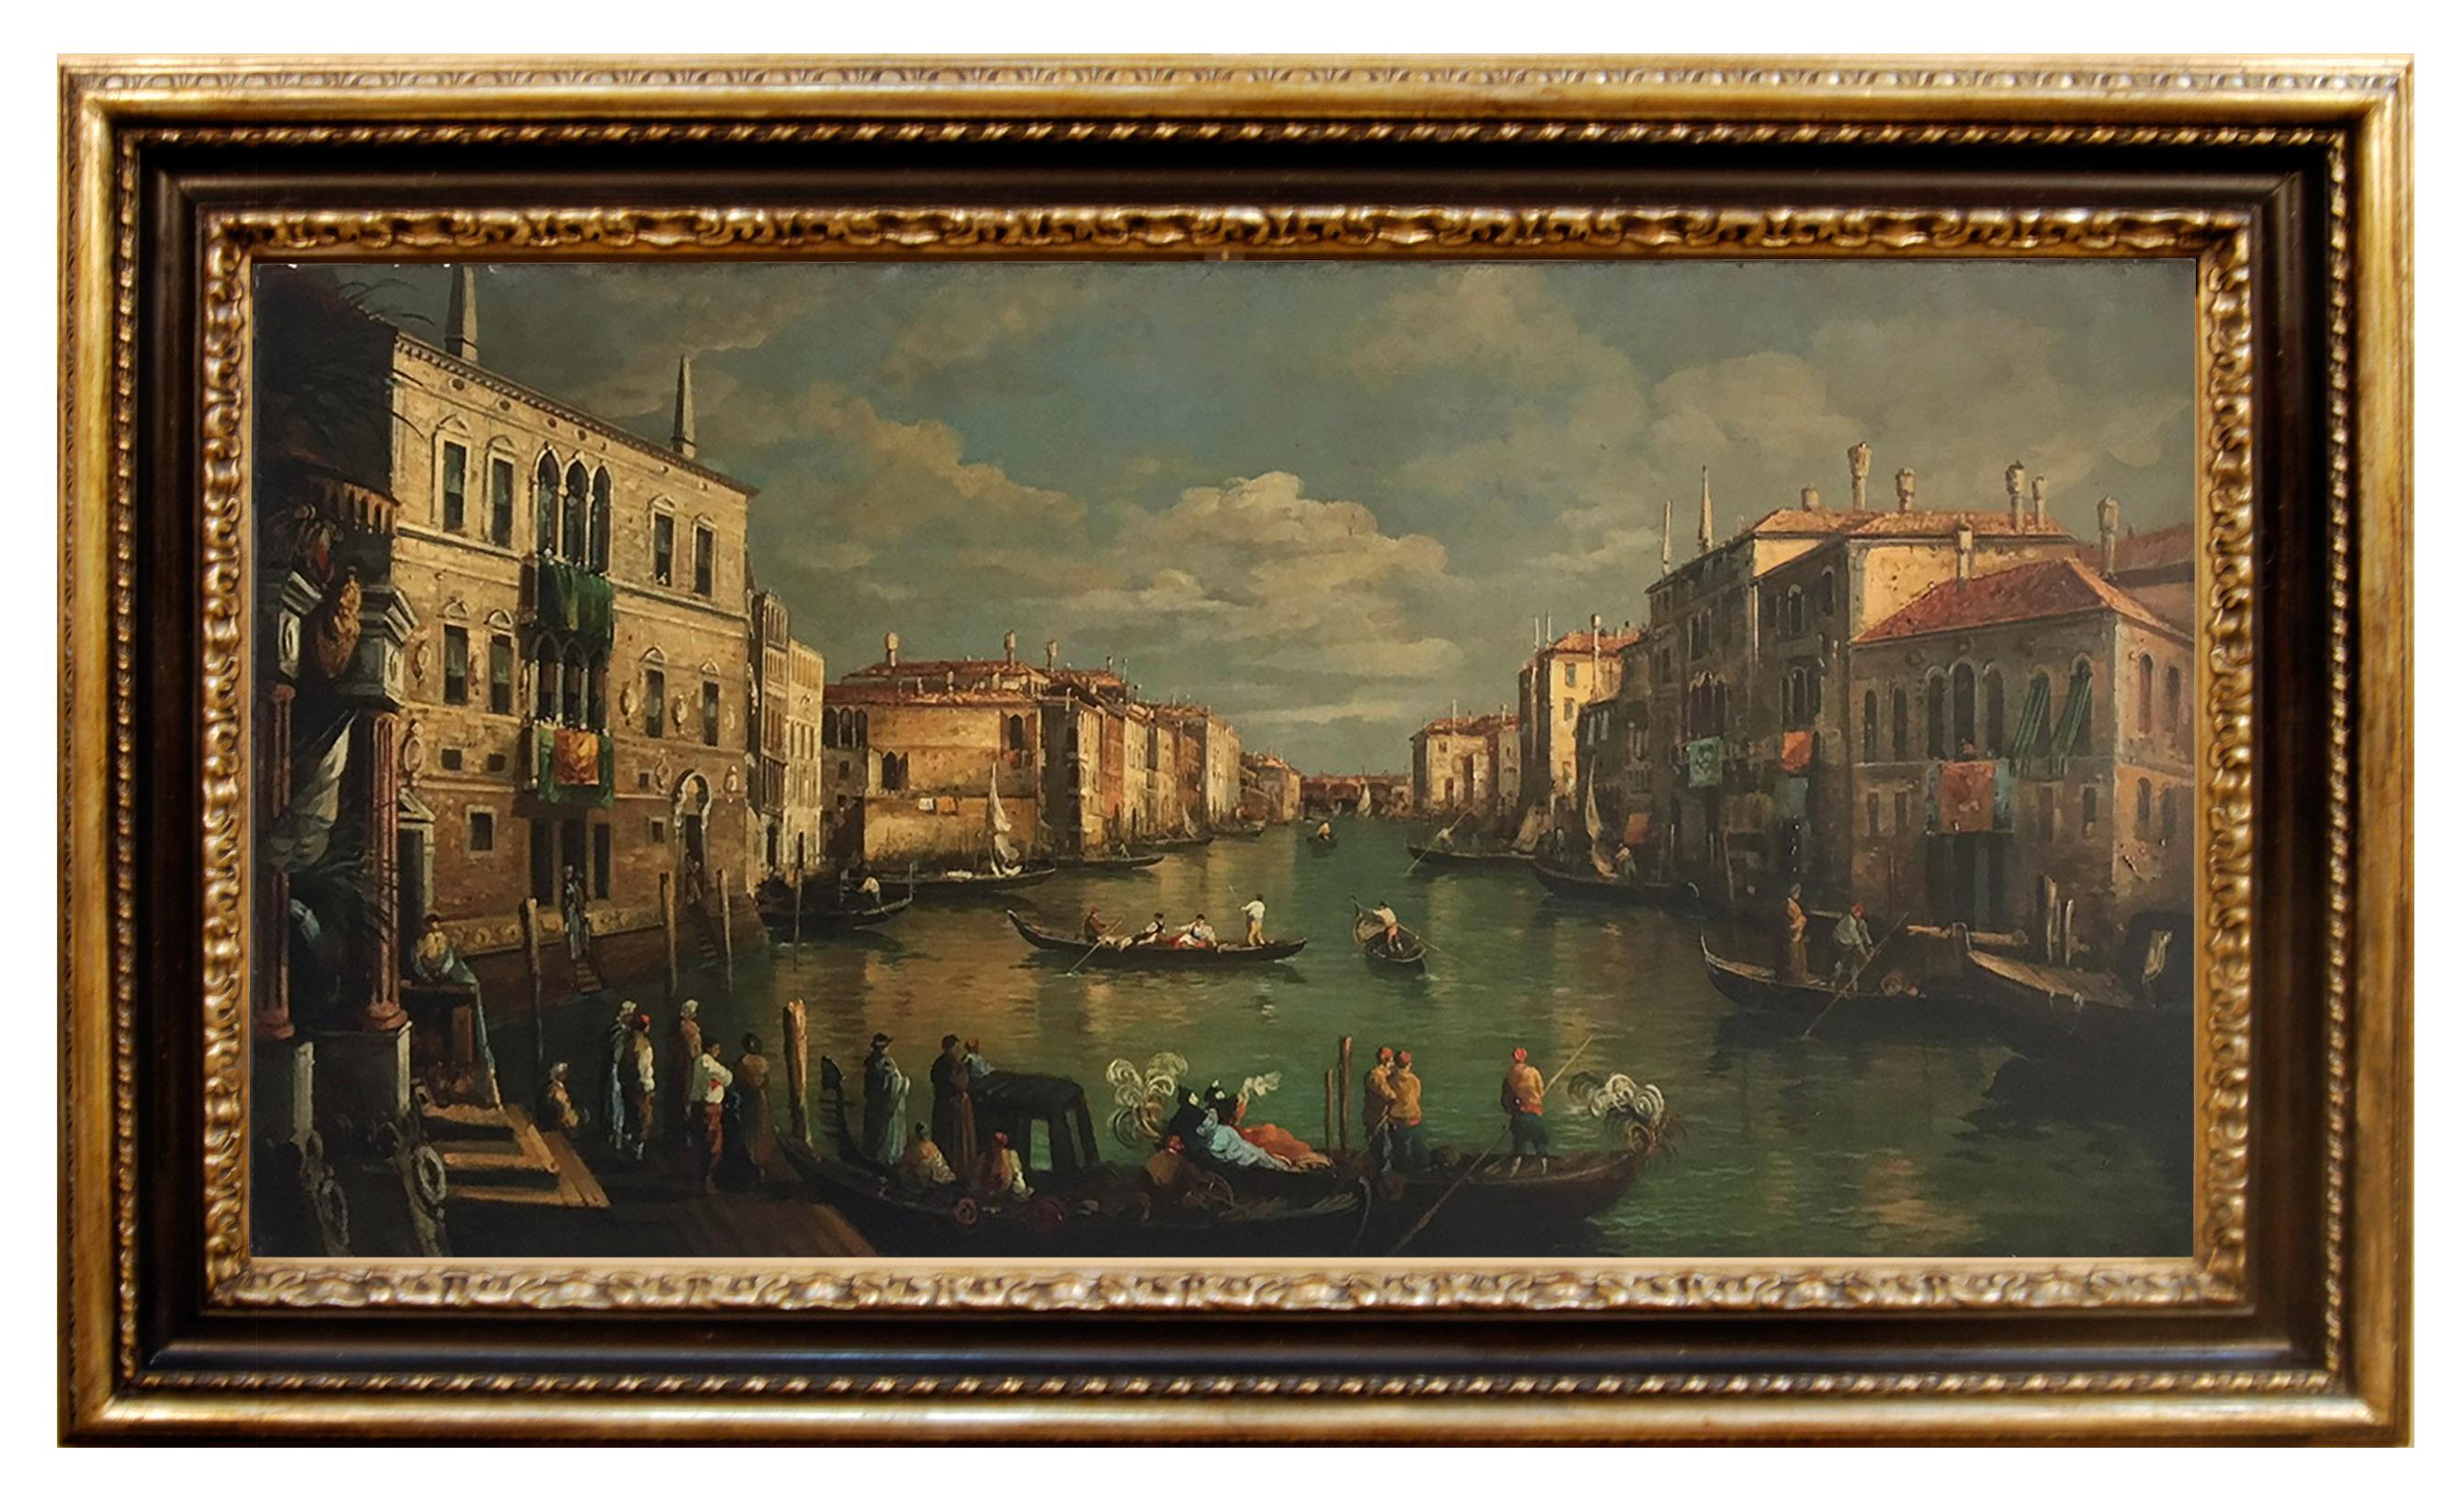 VENICE - In the Manner of Canaletto -Italian Landscape Oil on Canvas Painting 